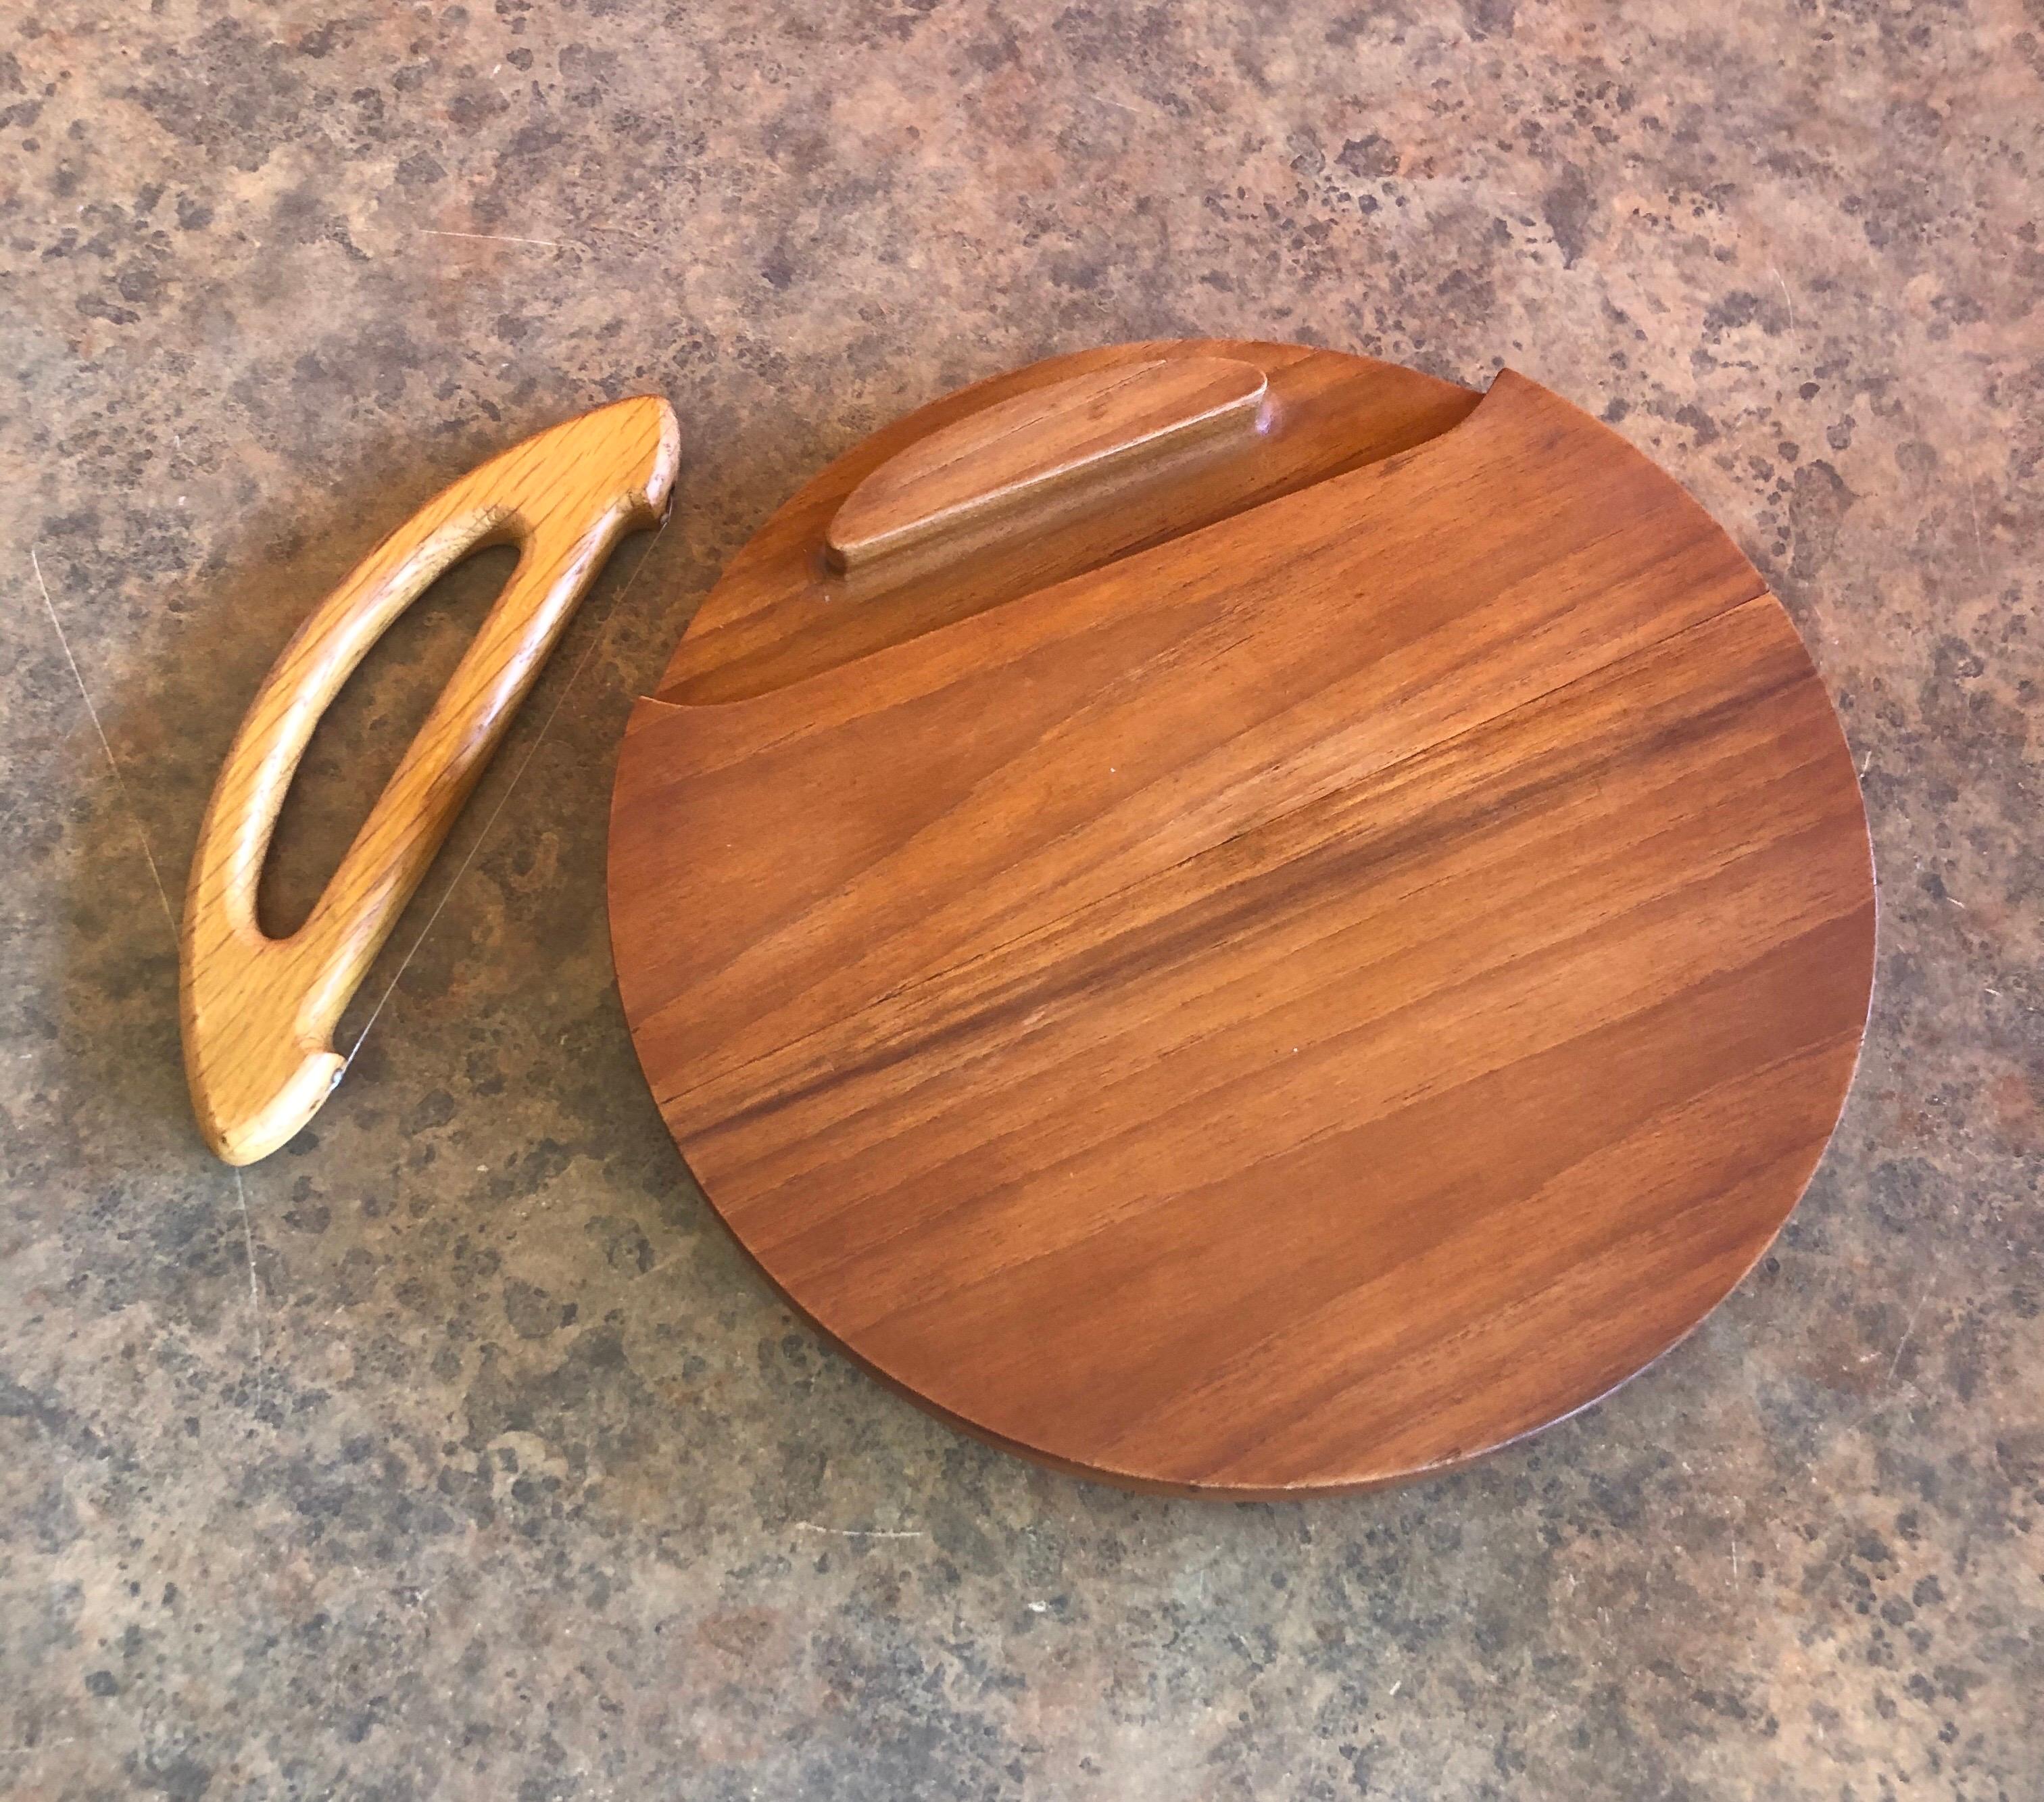 Danish Staved Teak Cheese Board with Cutter by Jens Quistgaard for Dansk